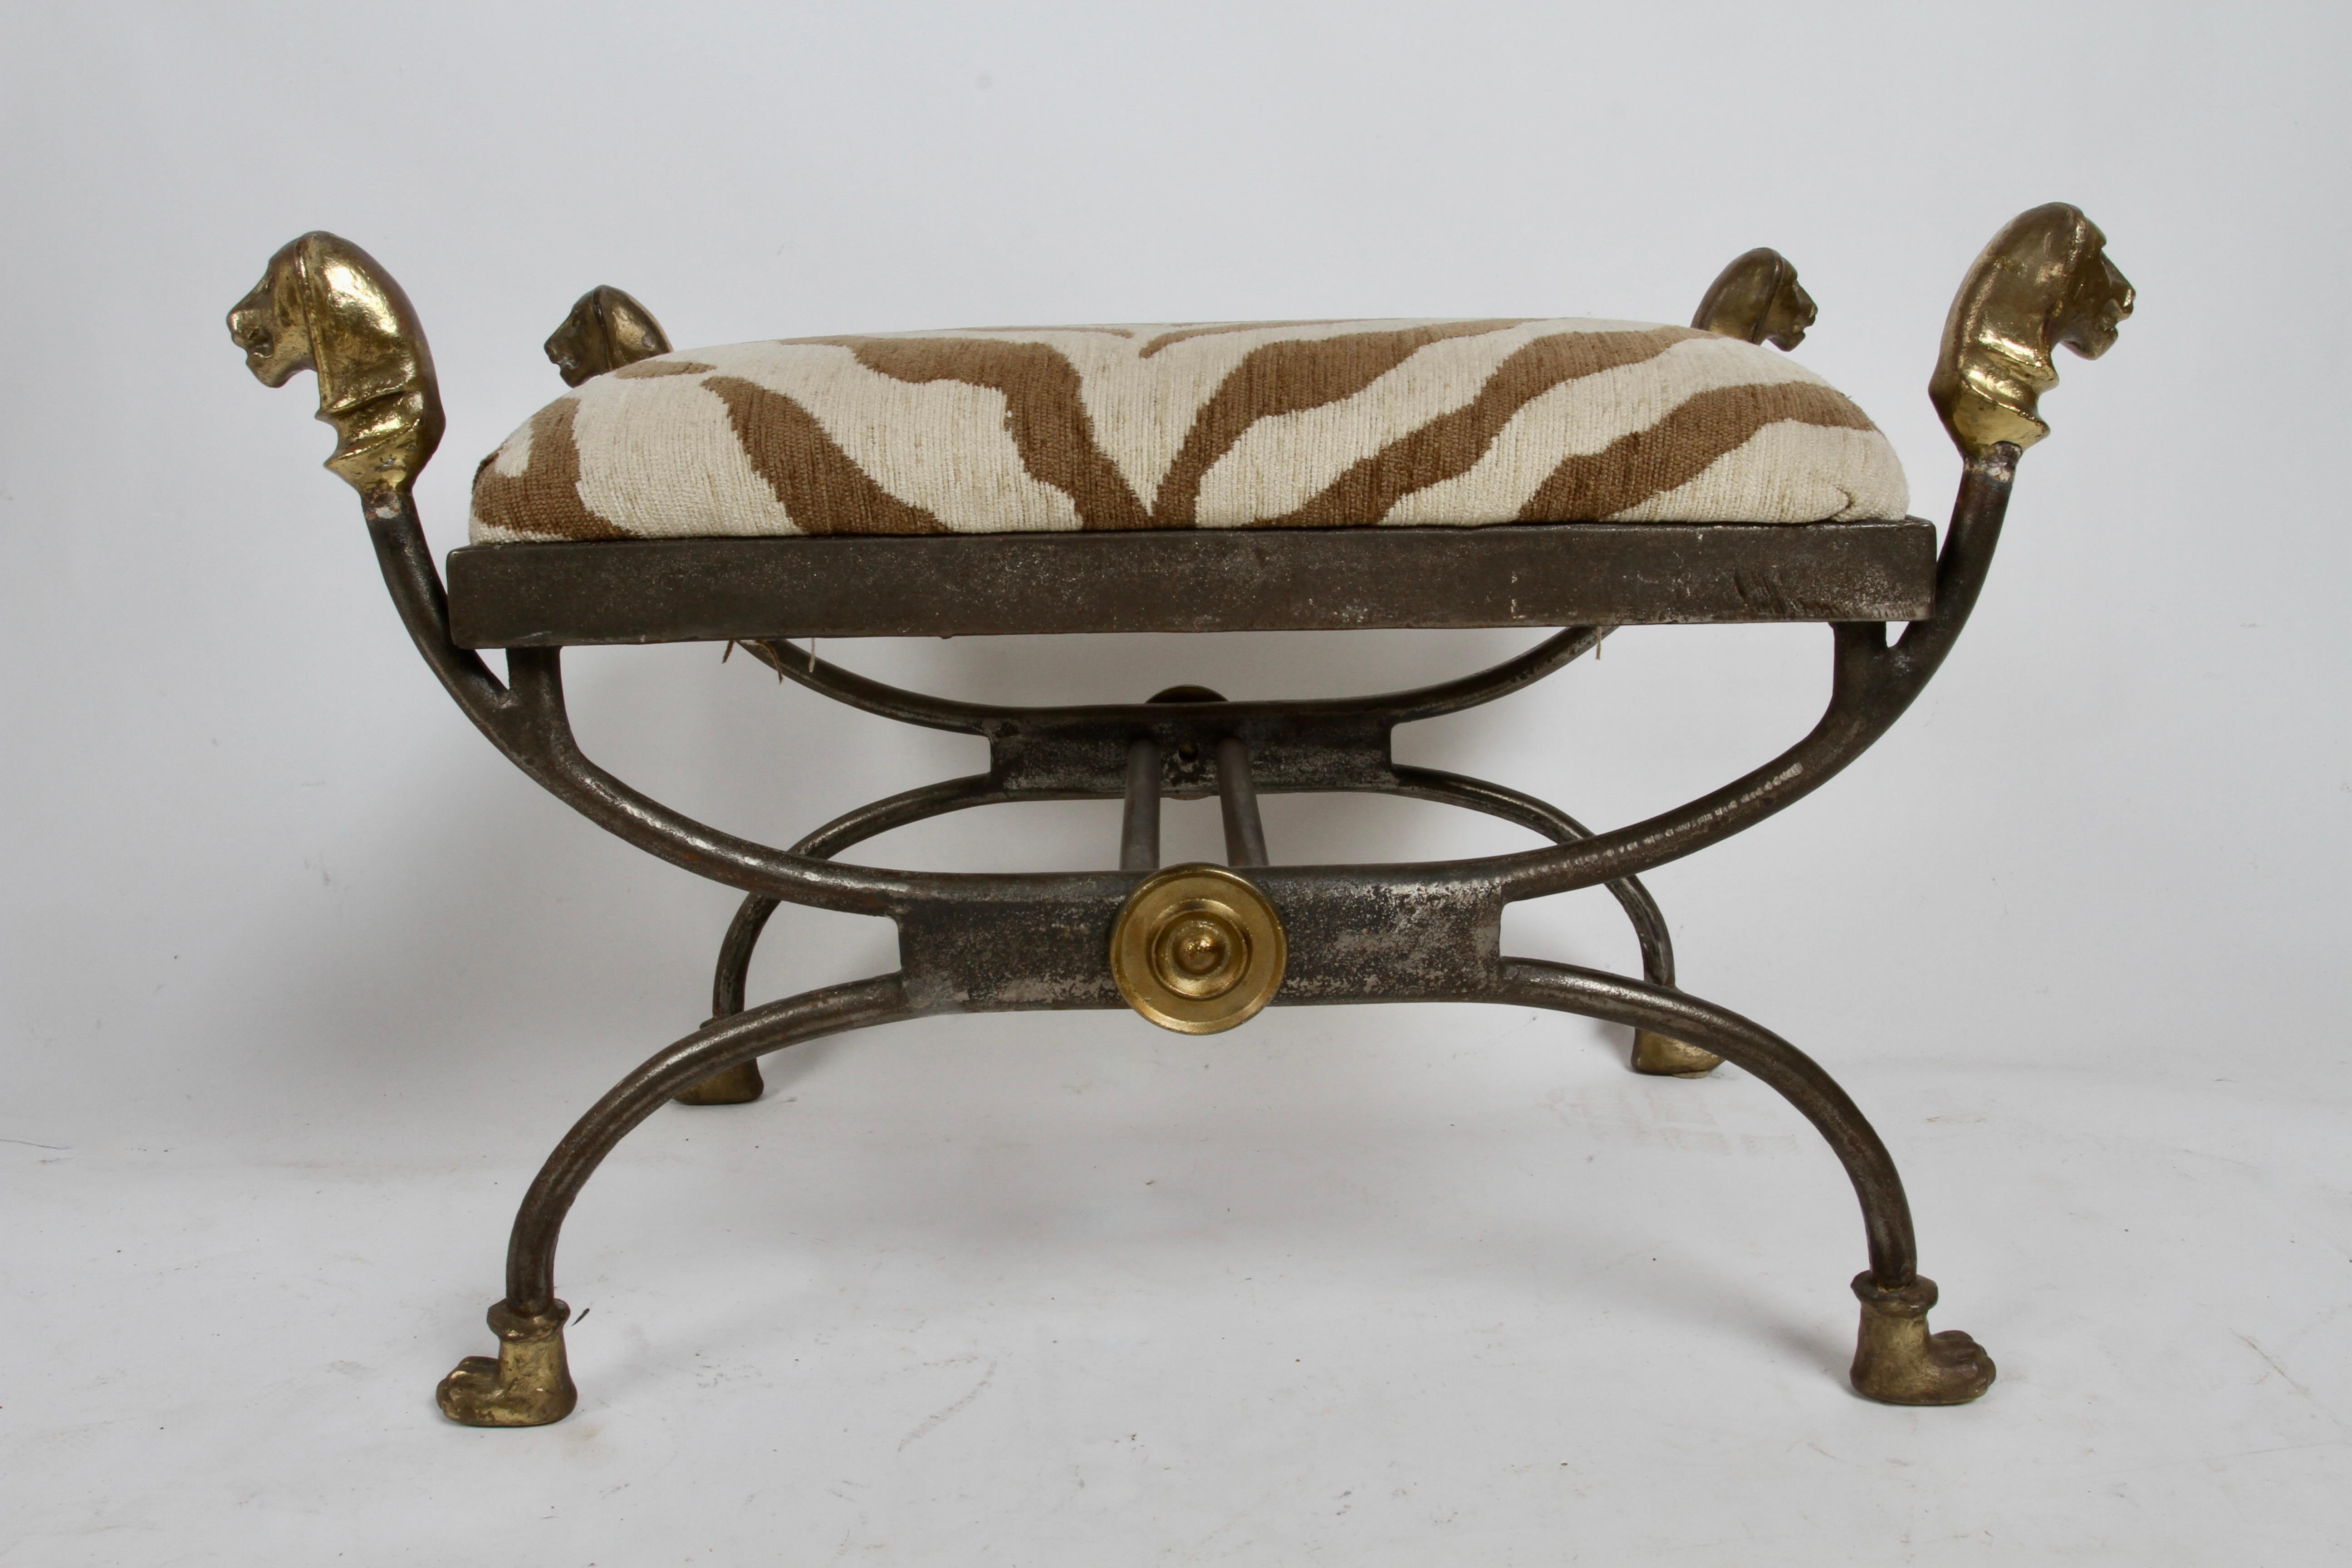 1970s Alberto & Diego Giacometti style classic X form ottoman with lion heads and paw feet, bronze fittings on heavy iron frame faux upholstered zebra seat. In very fine original condition, foam and upholstery are fine. 
